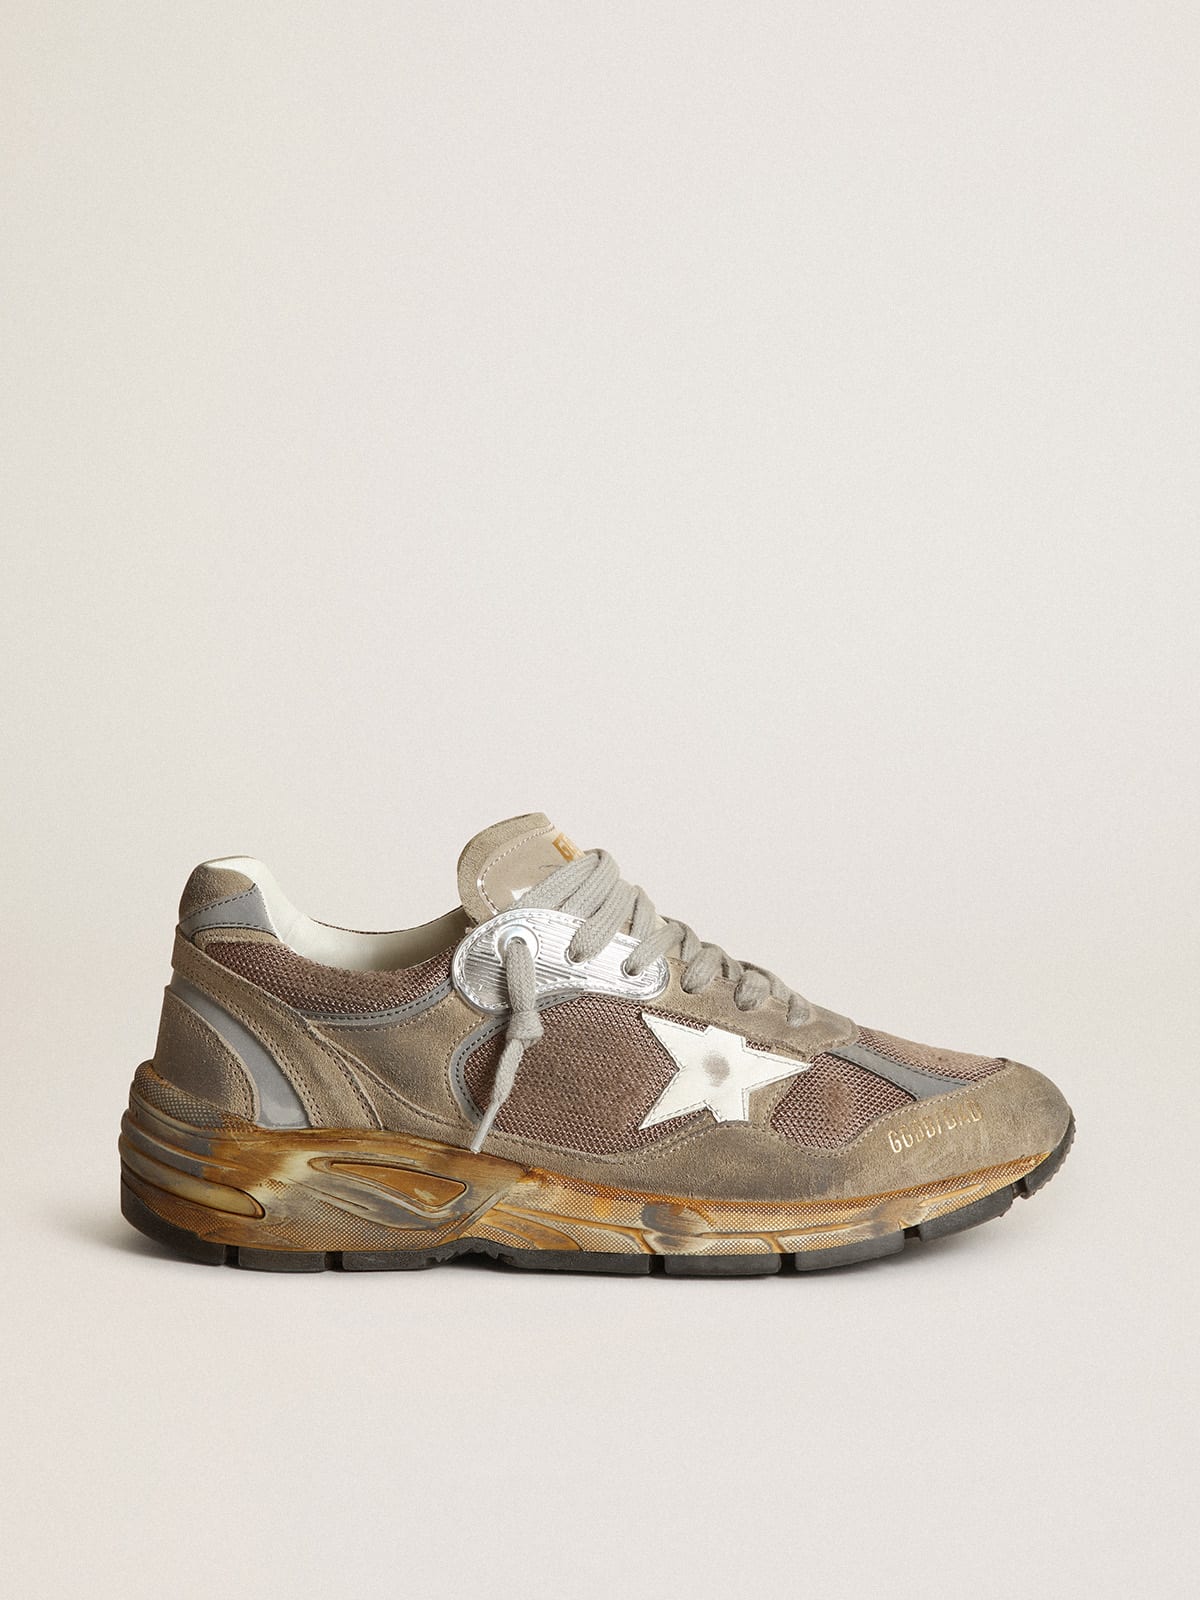 Women's Dad-Star sneakers in dove-gray mesh and suede with white leather star